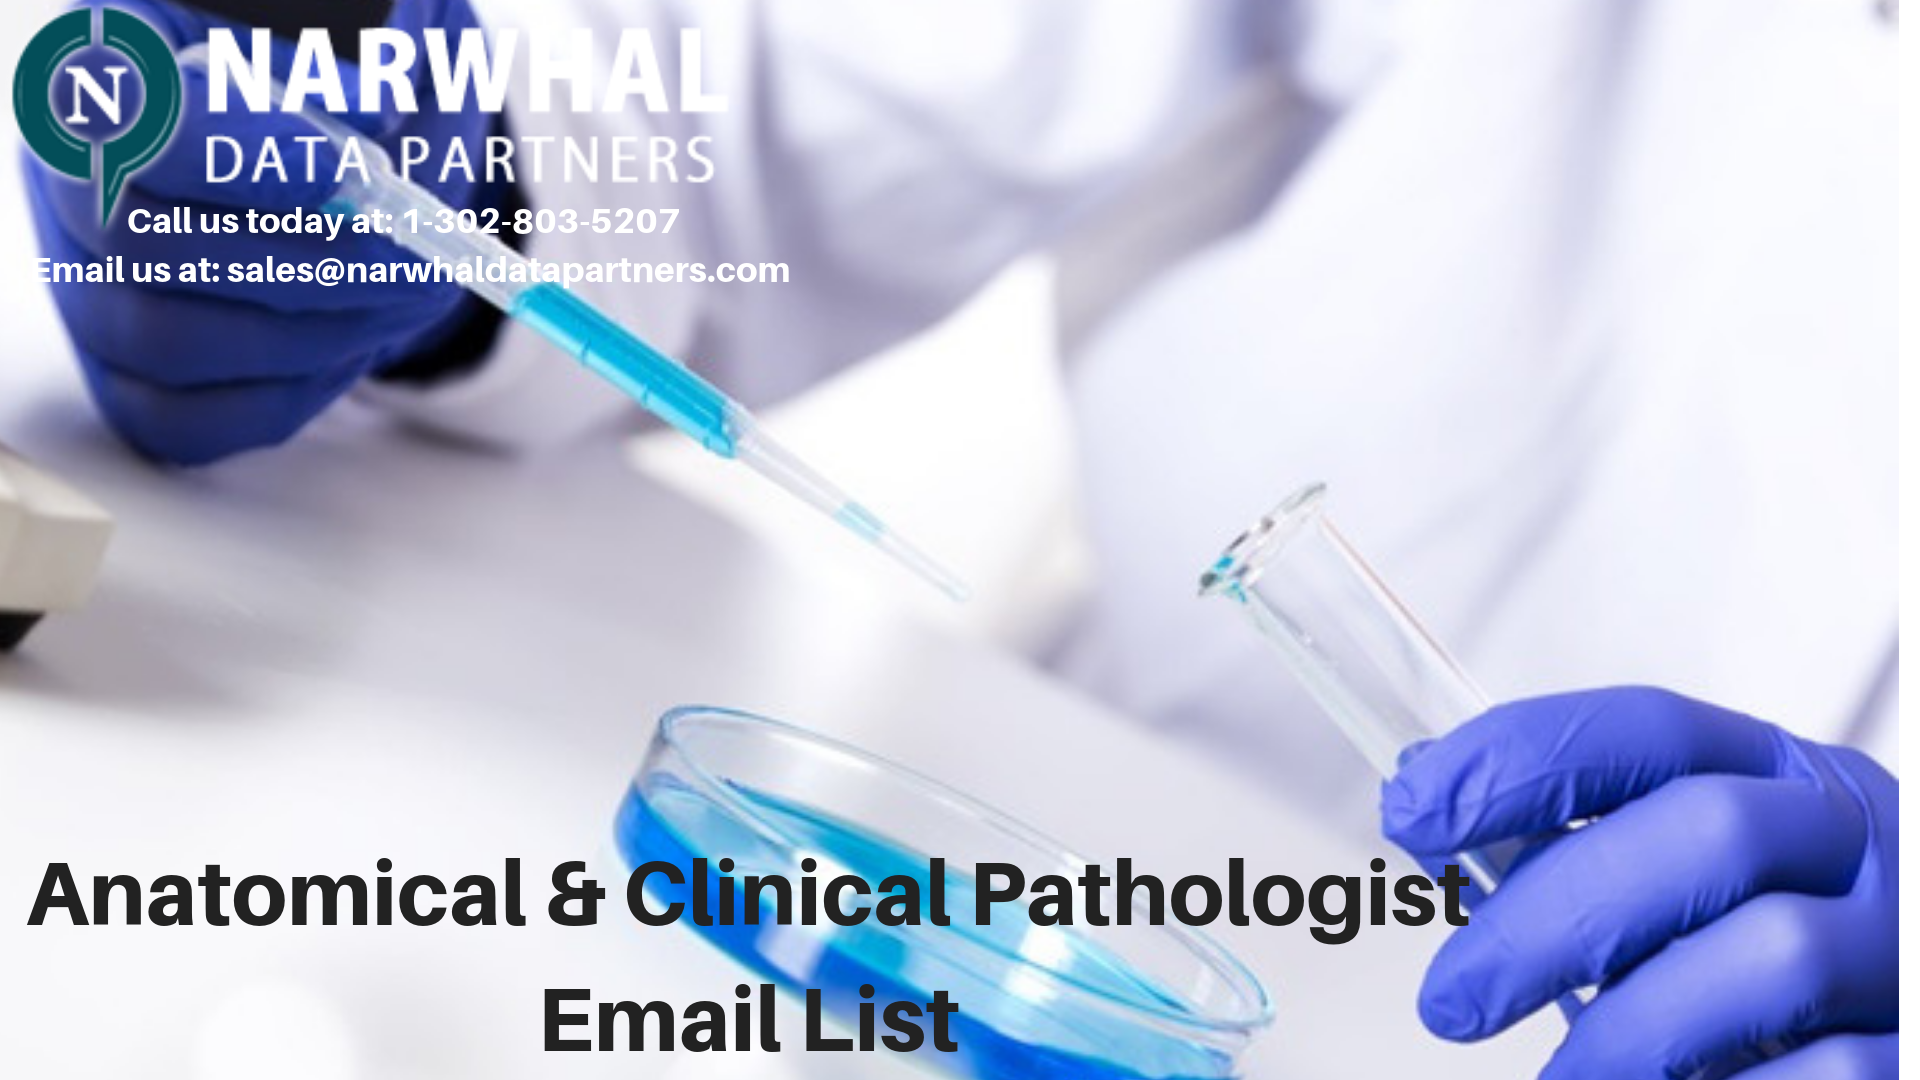 http://narwhaldatapartners.com/anatomical-and-clinical-pathologist-email-list.html